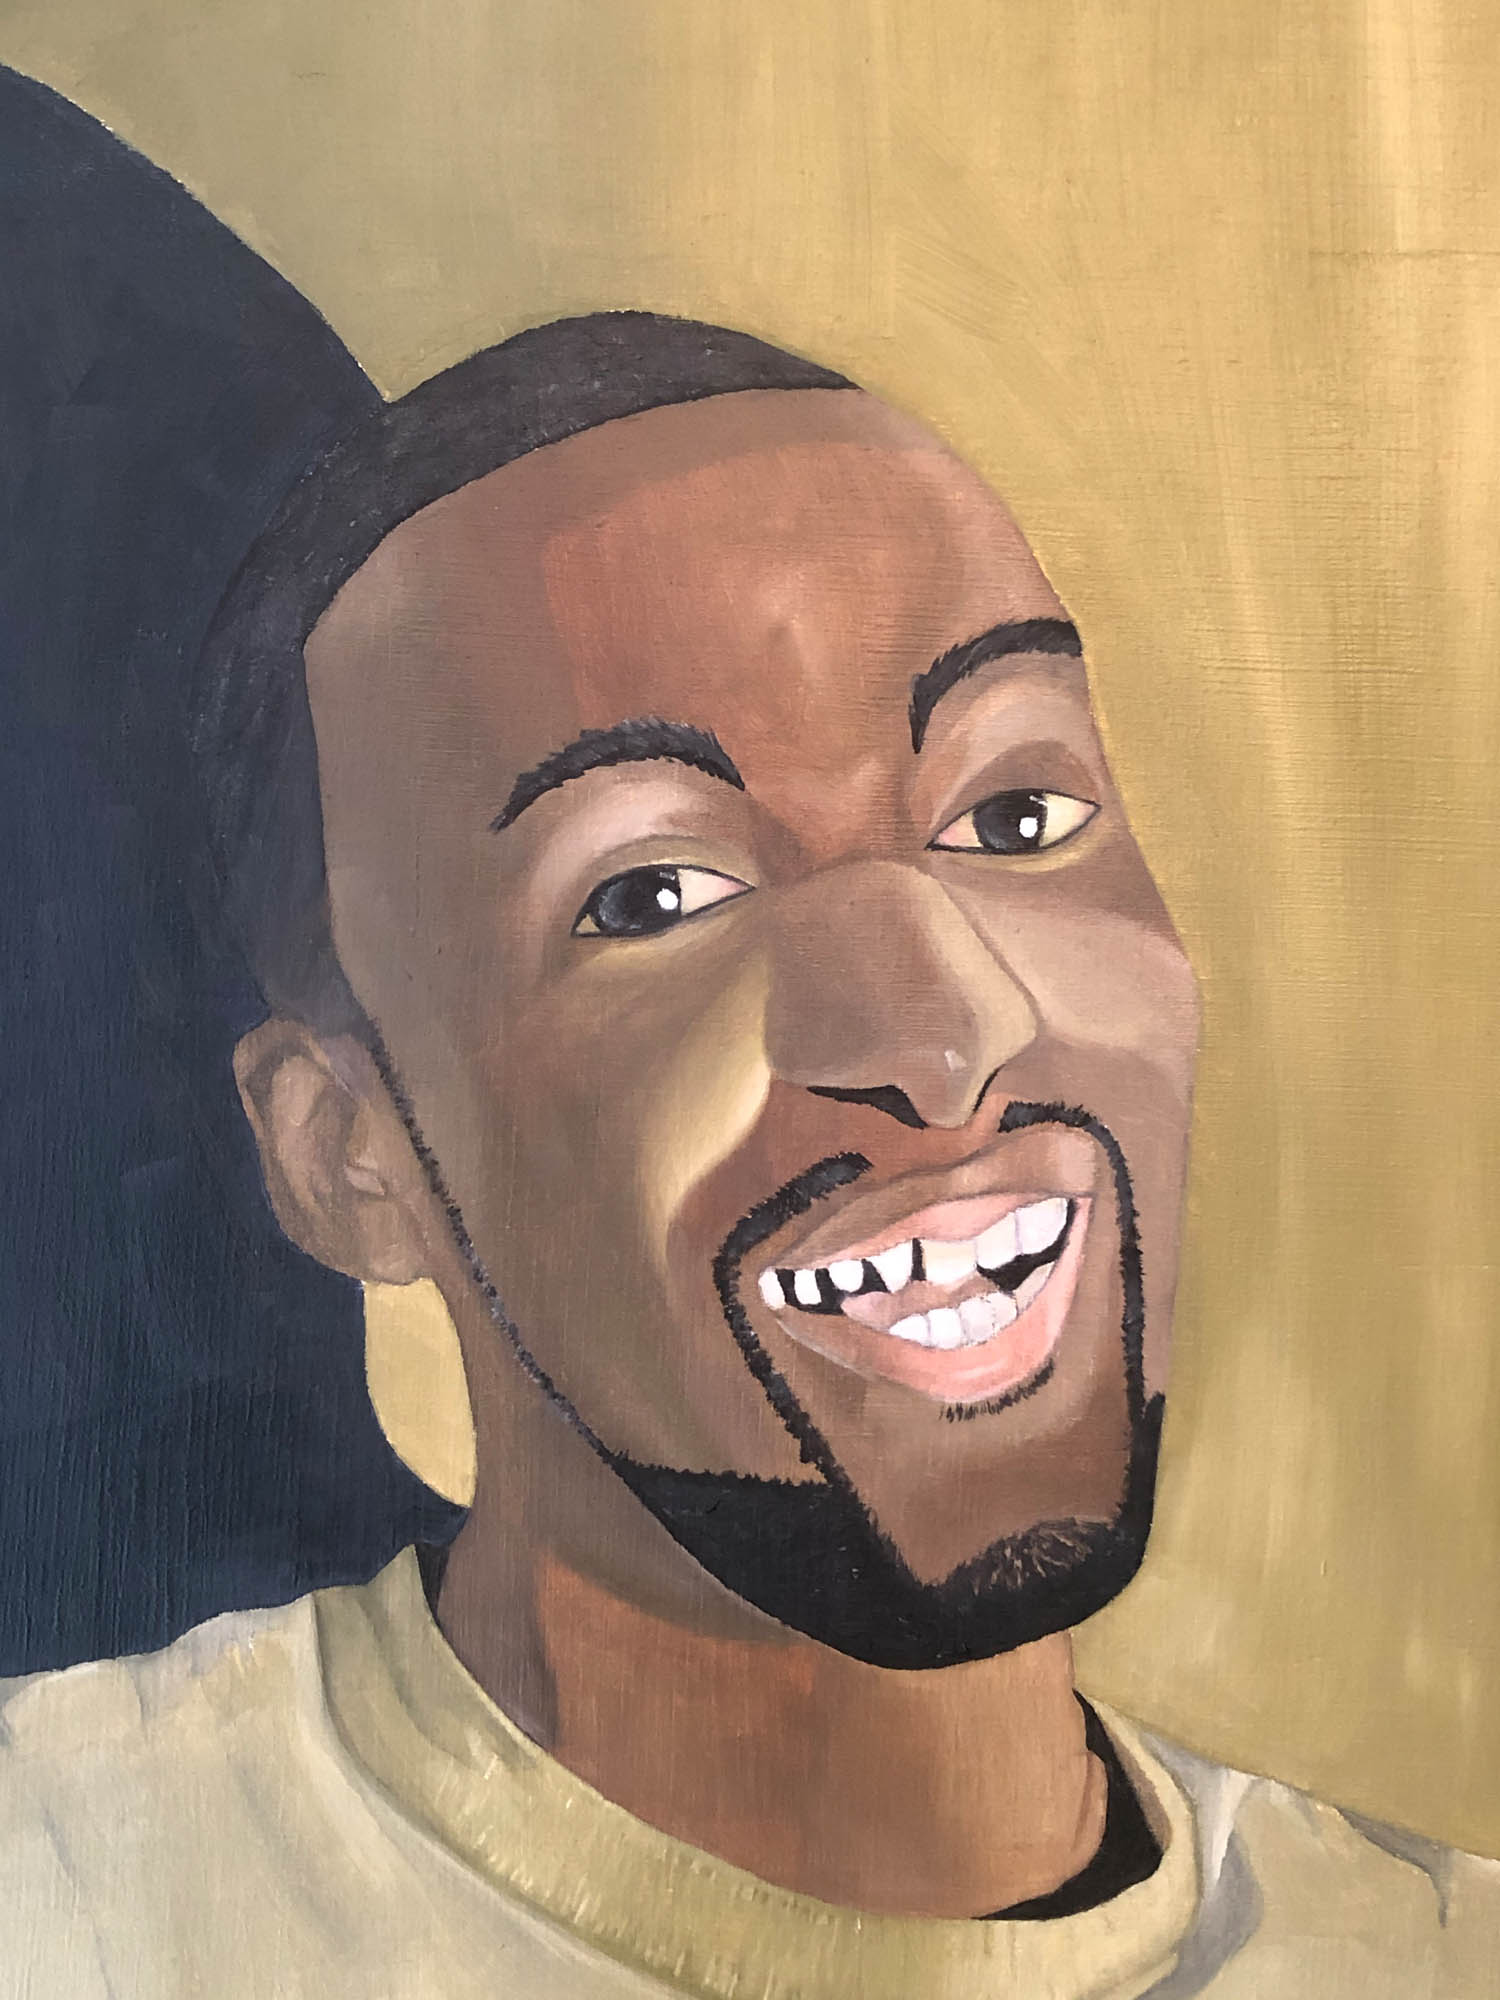 African American male friend emphasizing an emotion of happiness. Detailed and textural image of specific brush stroke on the male figure’s face and facial features, which helps compliments the emotional feeling of “sociality”